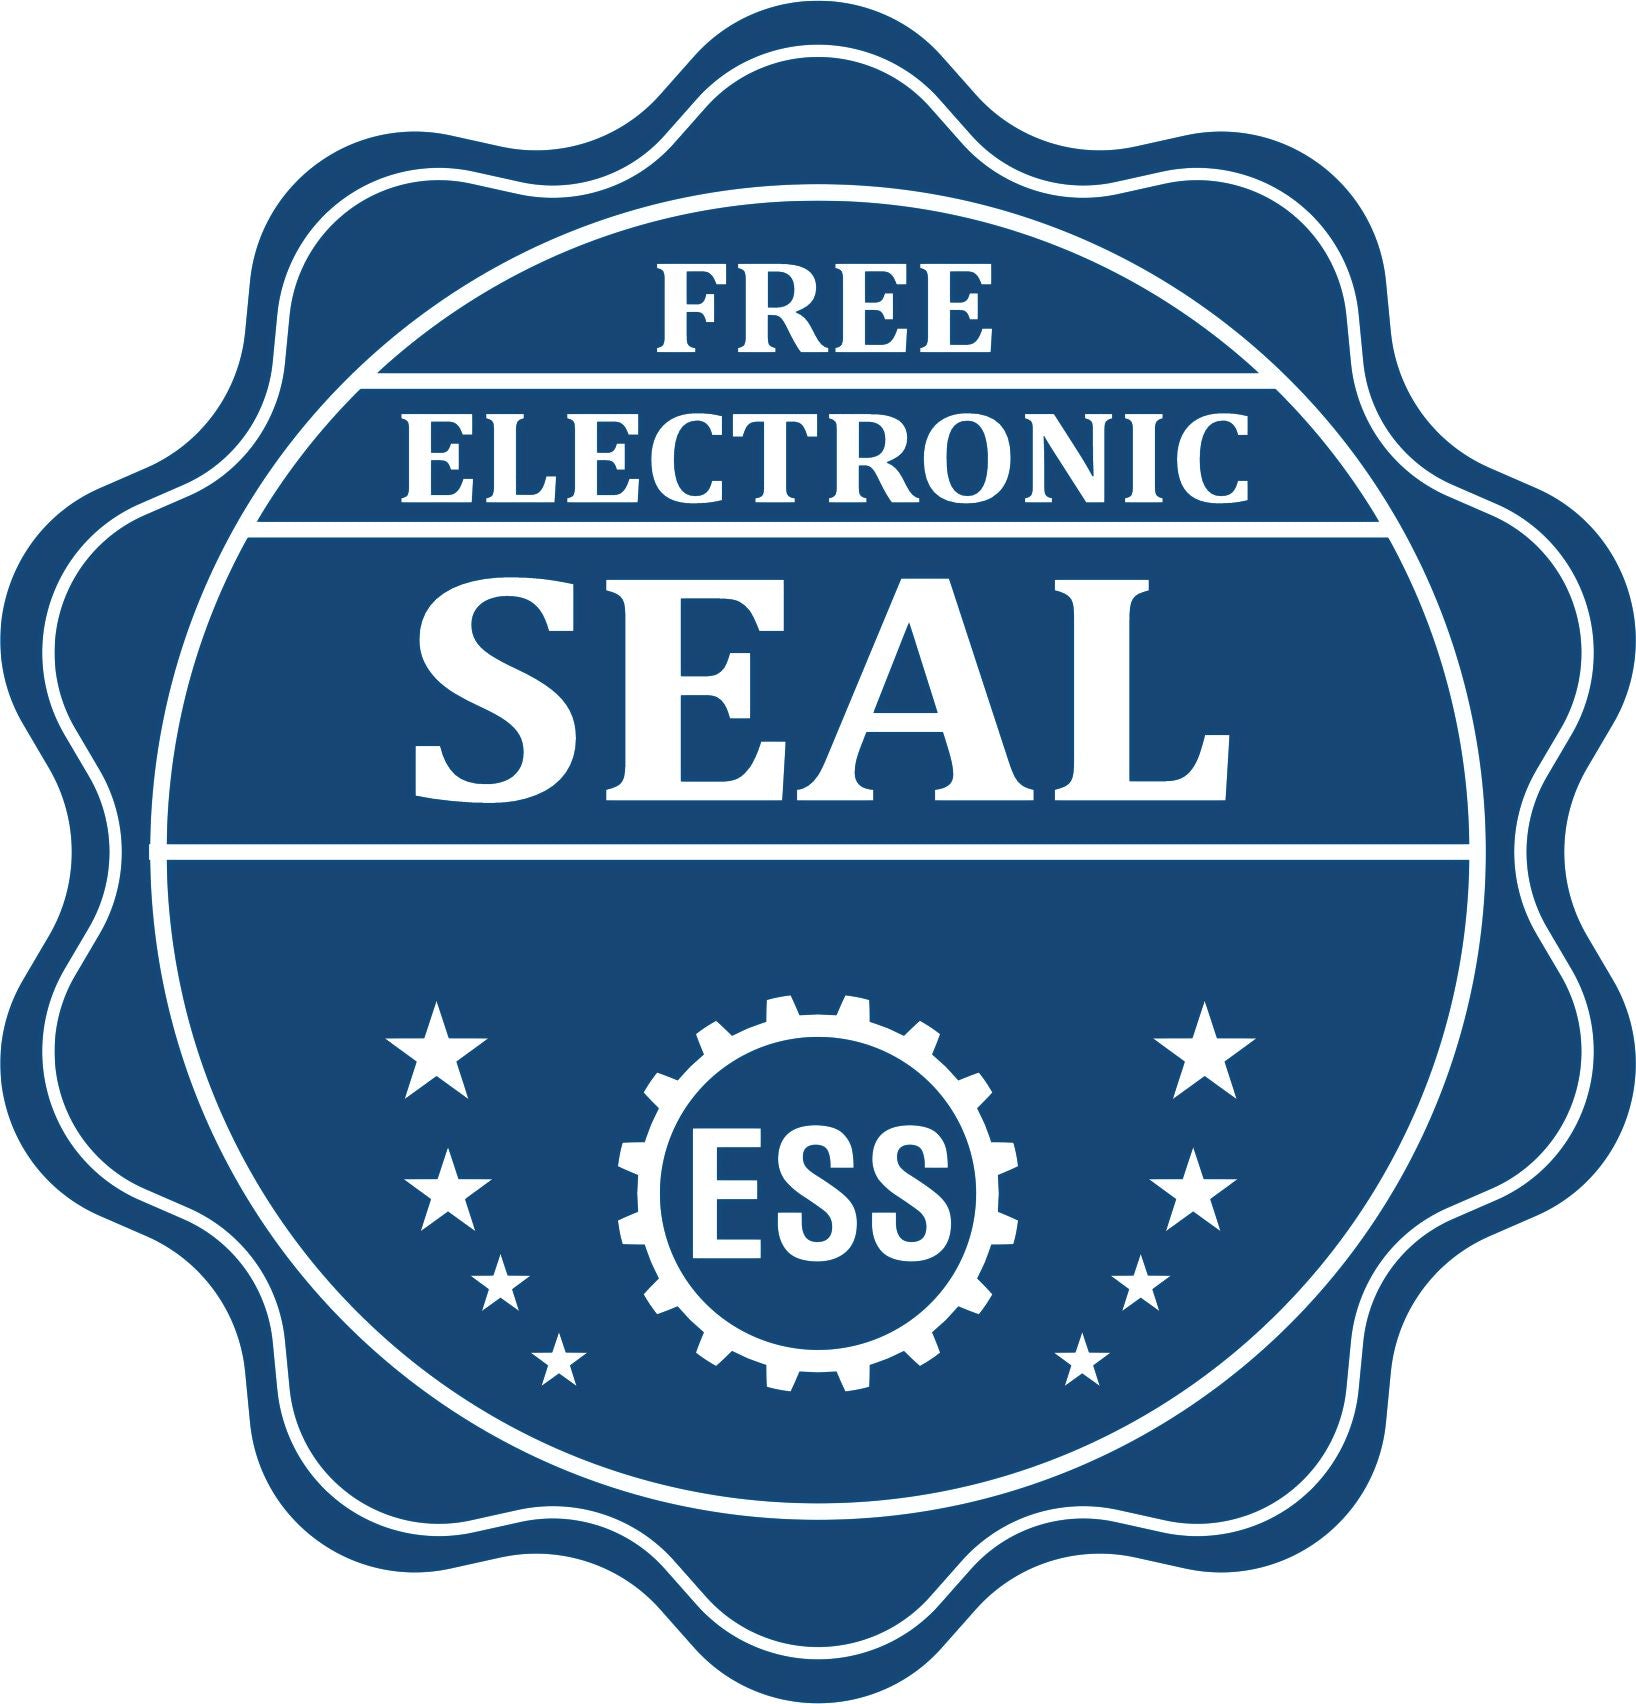 A badge showing a free electronic seal for the Slim Pre-Inked West Virginia Land Surveyor Seal Stamp with stars and the ESS gear on the emblem.